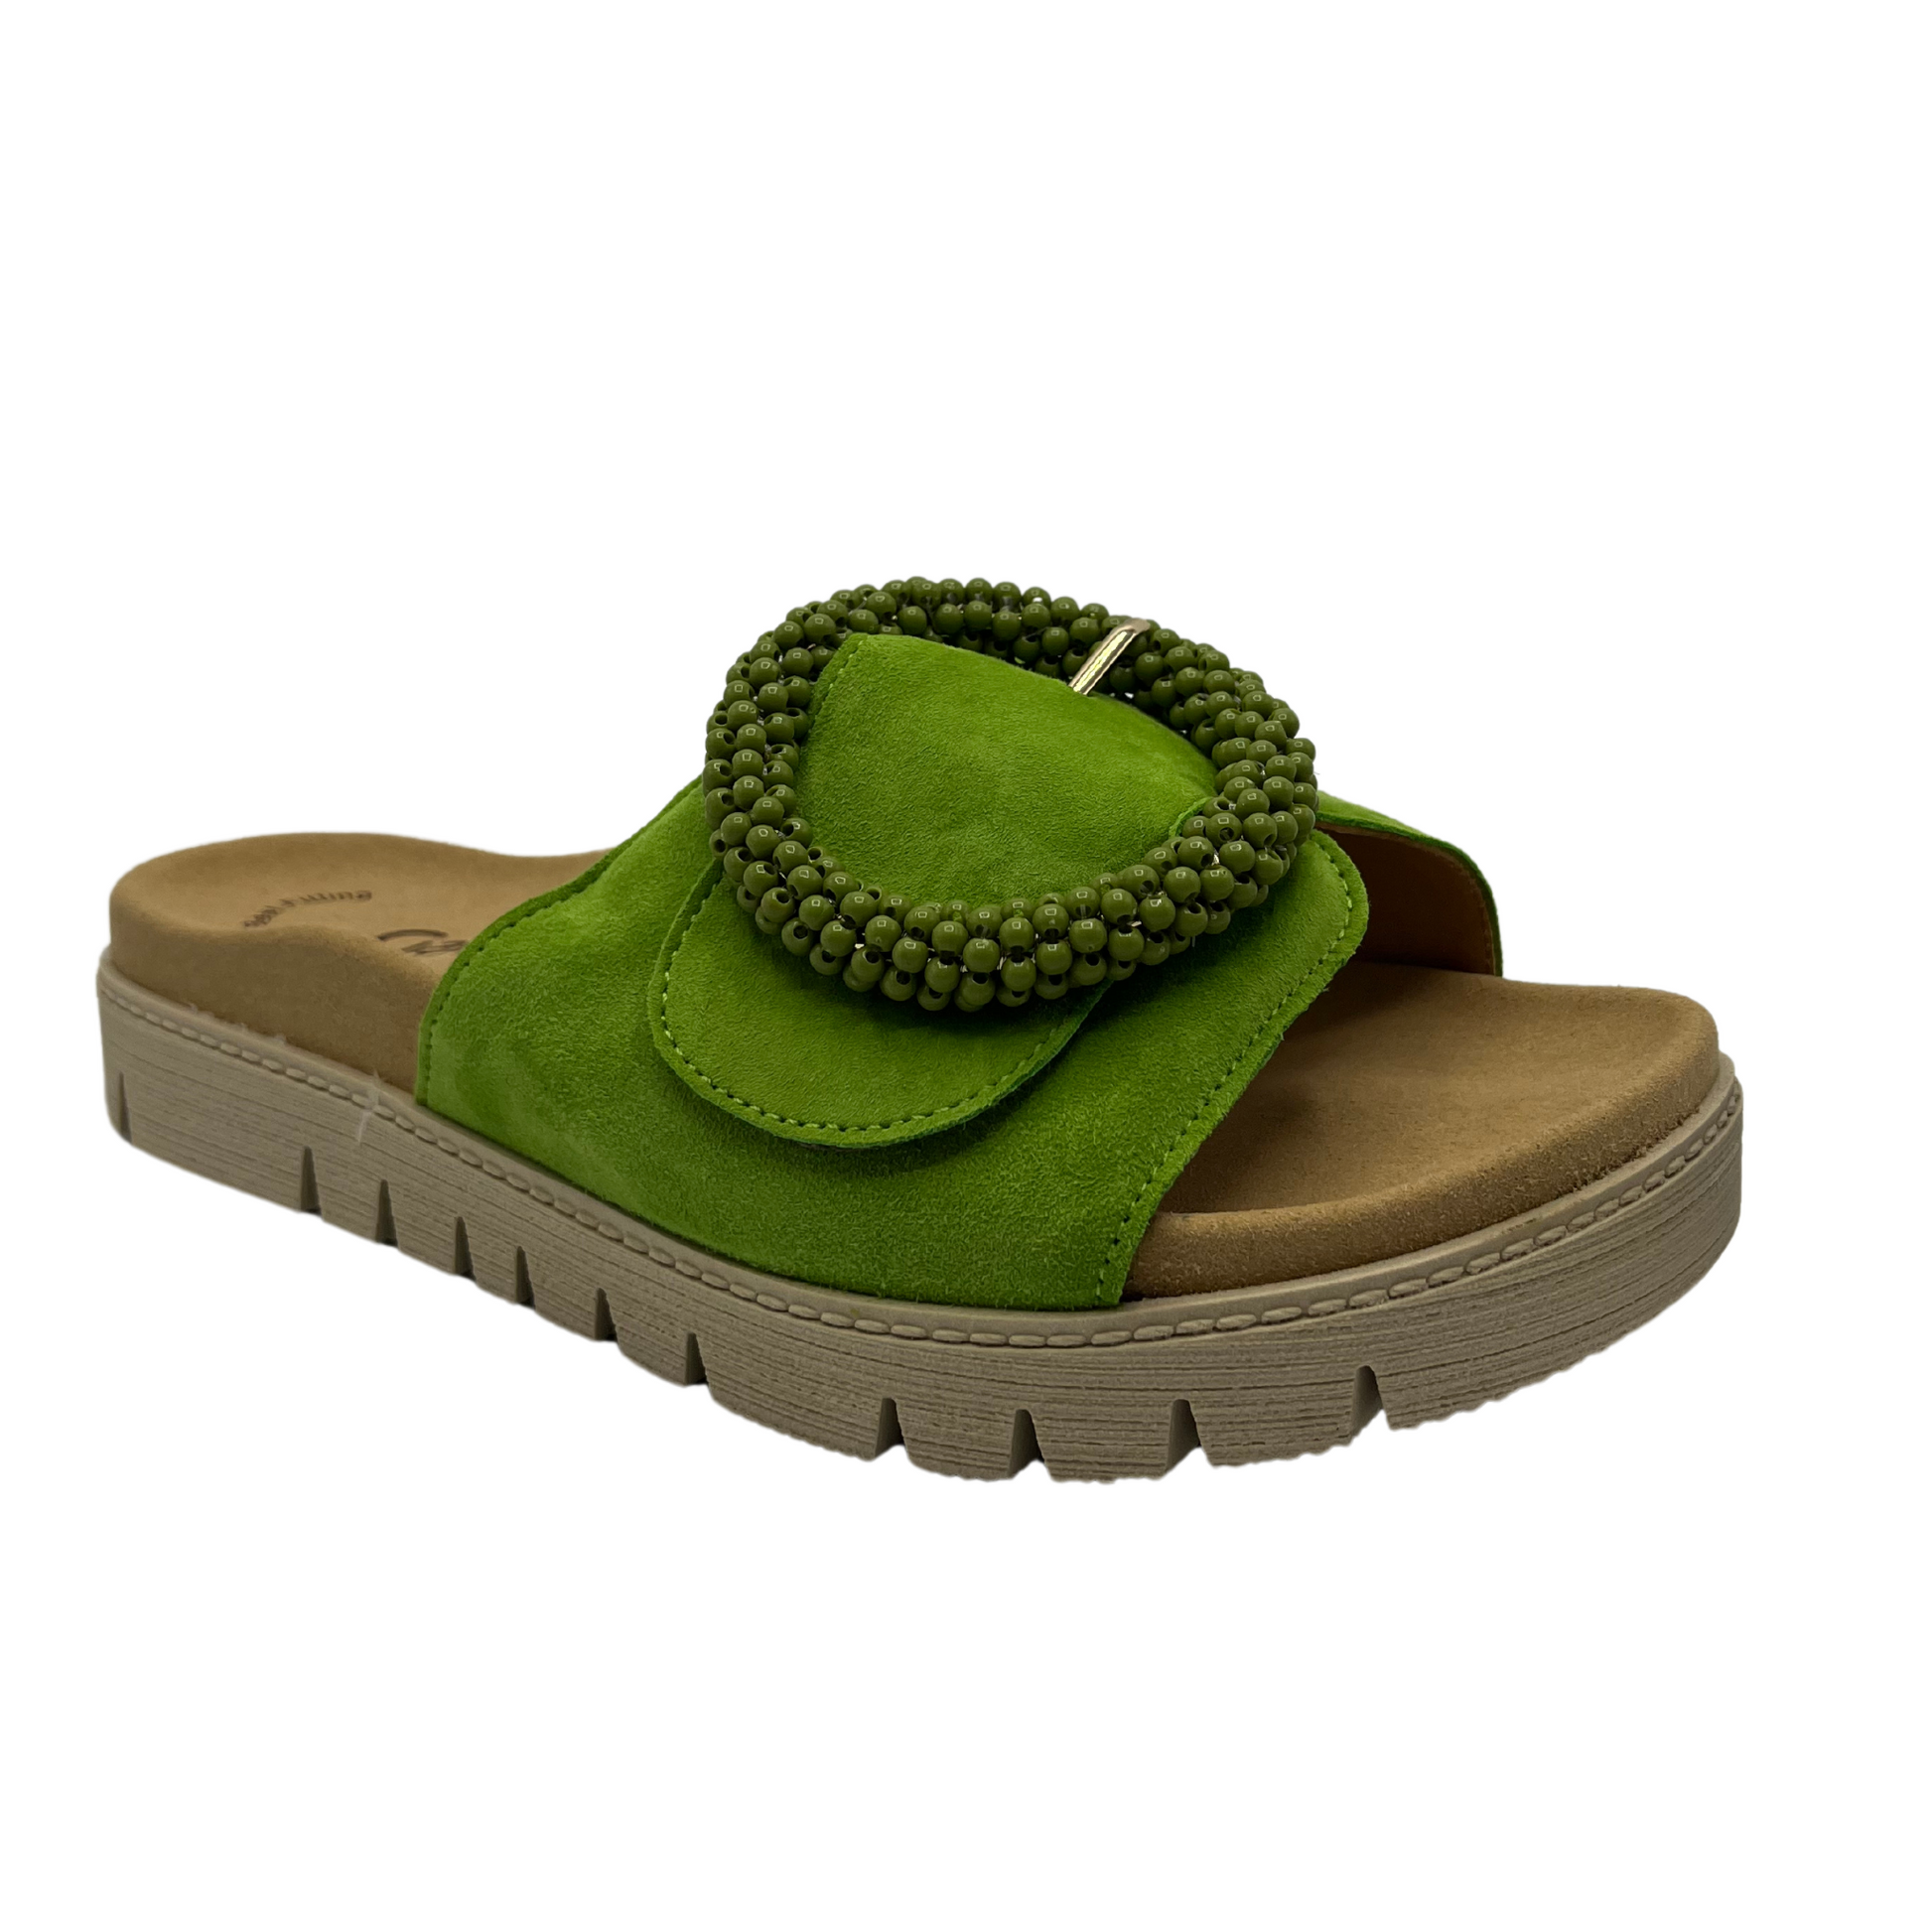 45 degree angled view of Lime green suede slide with large buckle detail and anatomical footbed